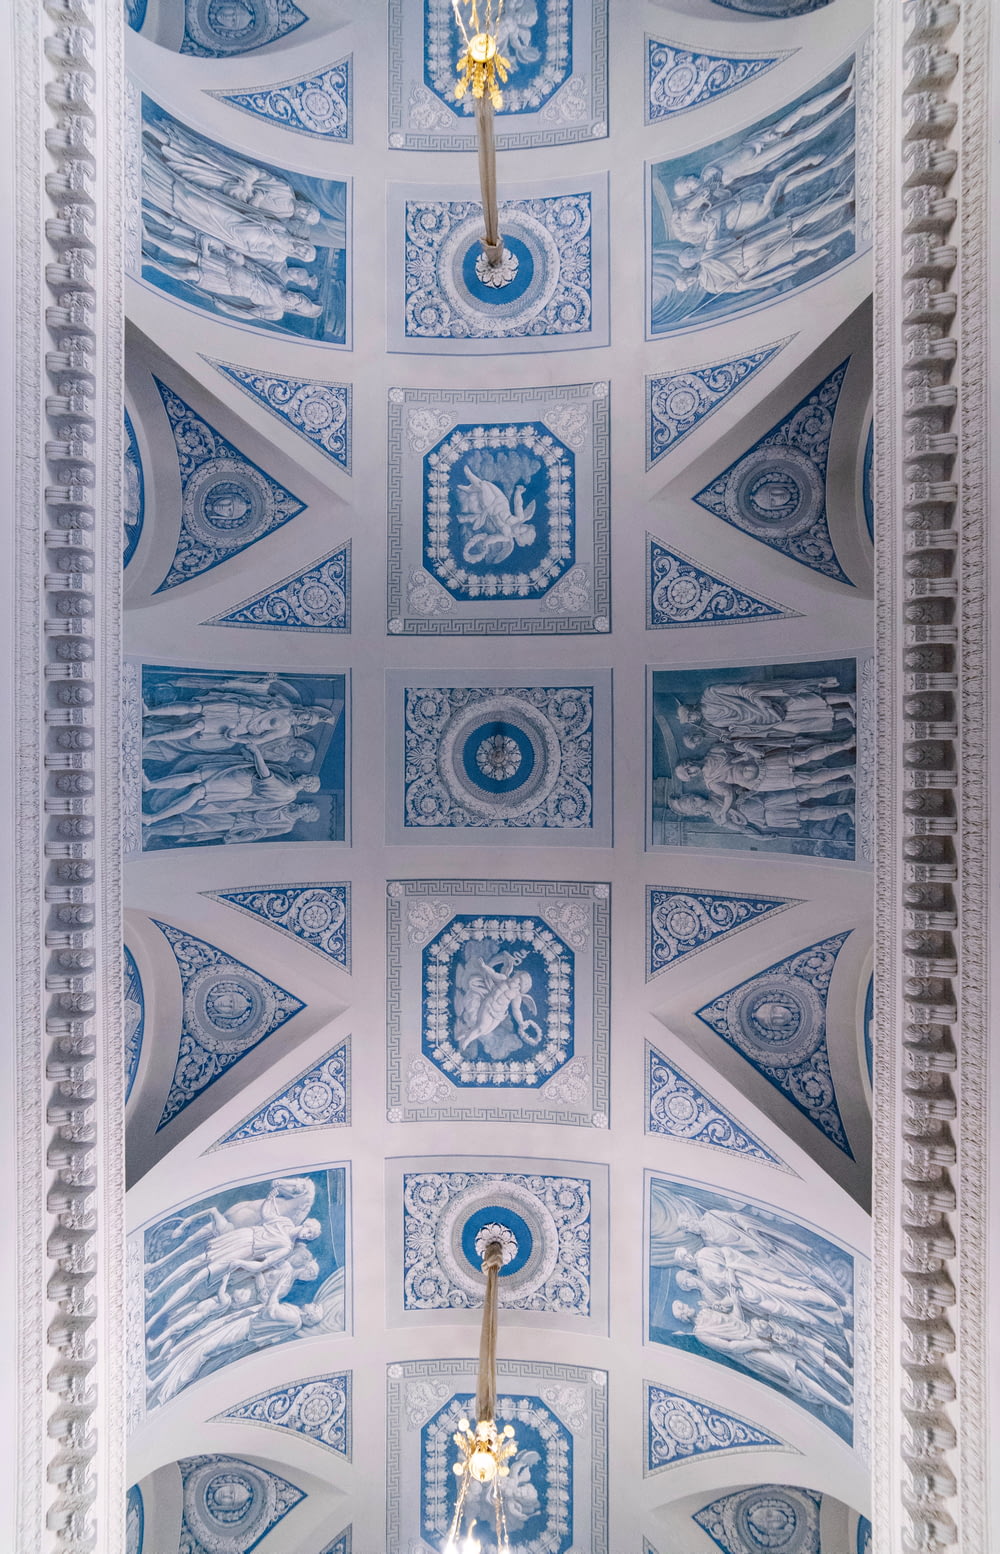 the ceiling of a church with a blue and white design